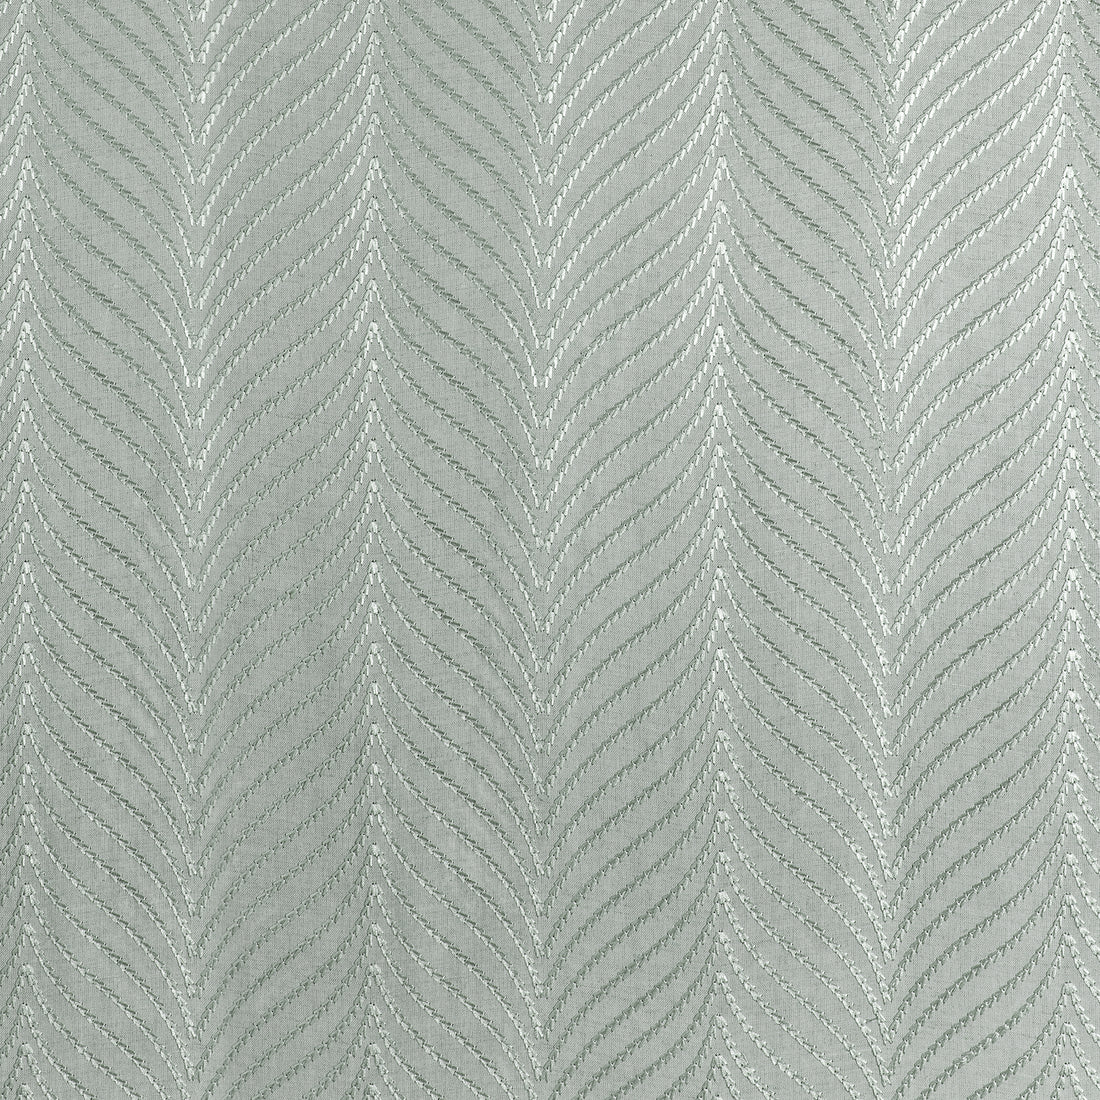 Clayton Herringbone Embroidery fabric in light grey color - pattern number W775446 - by Thibaut in the Dynasty collection